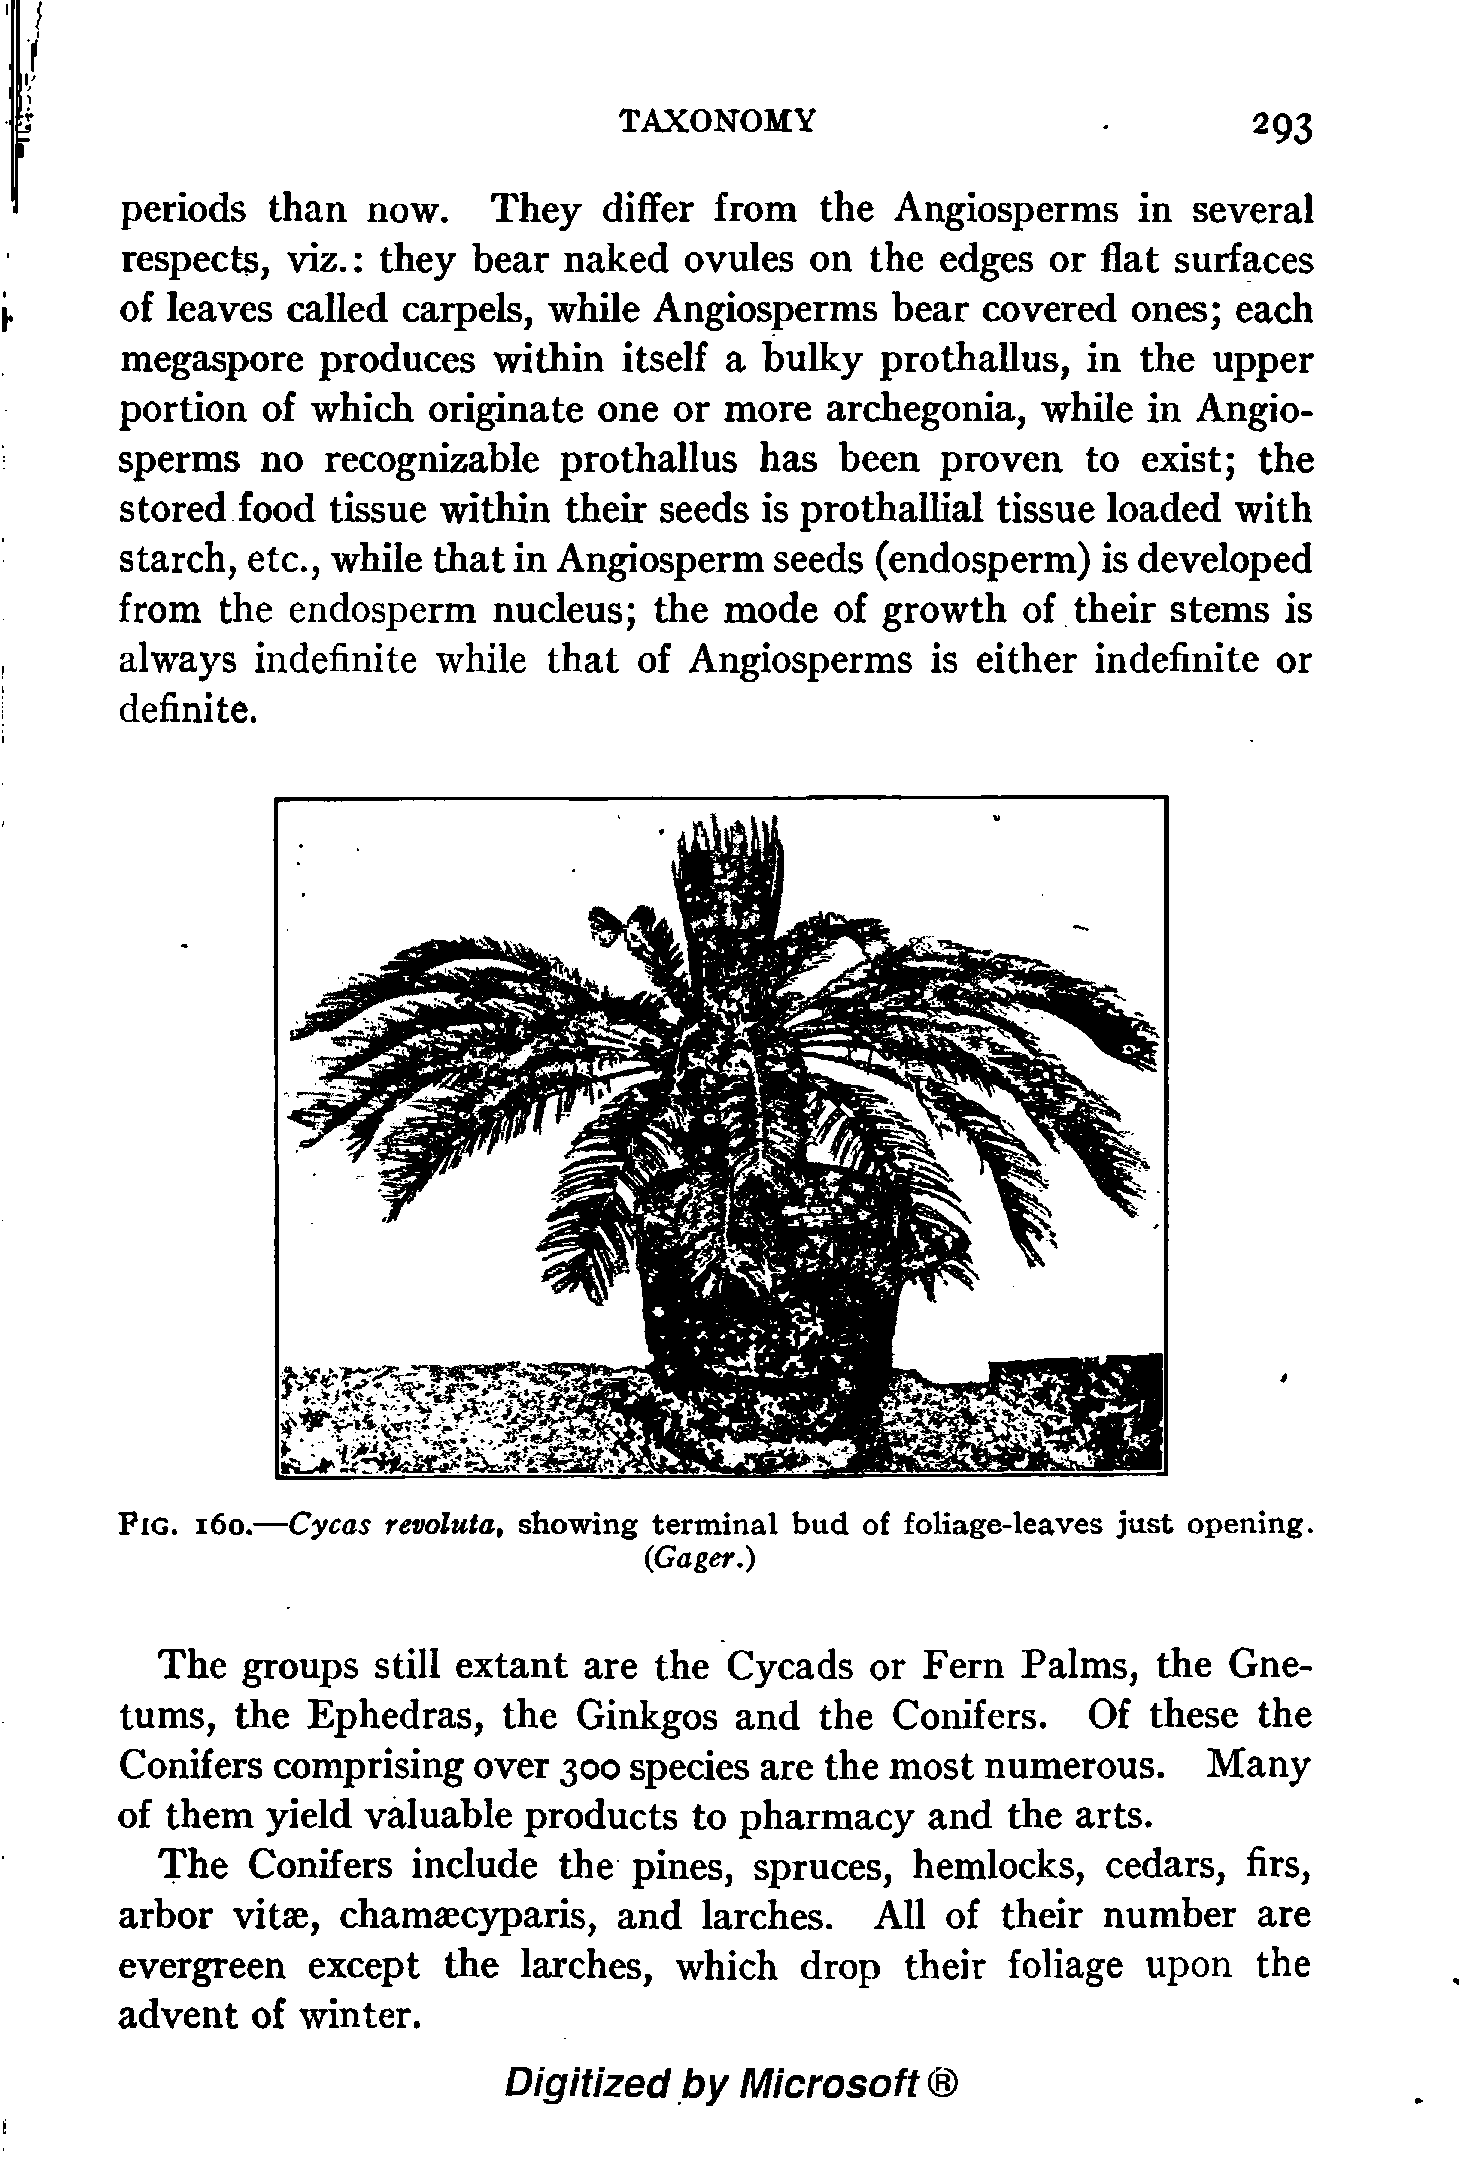 Fig. 160.—Cycas revoluta, showing terminal bud of foliage-leaves just opening.